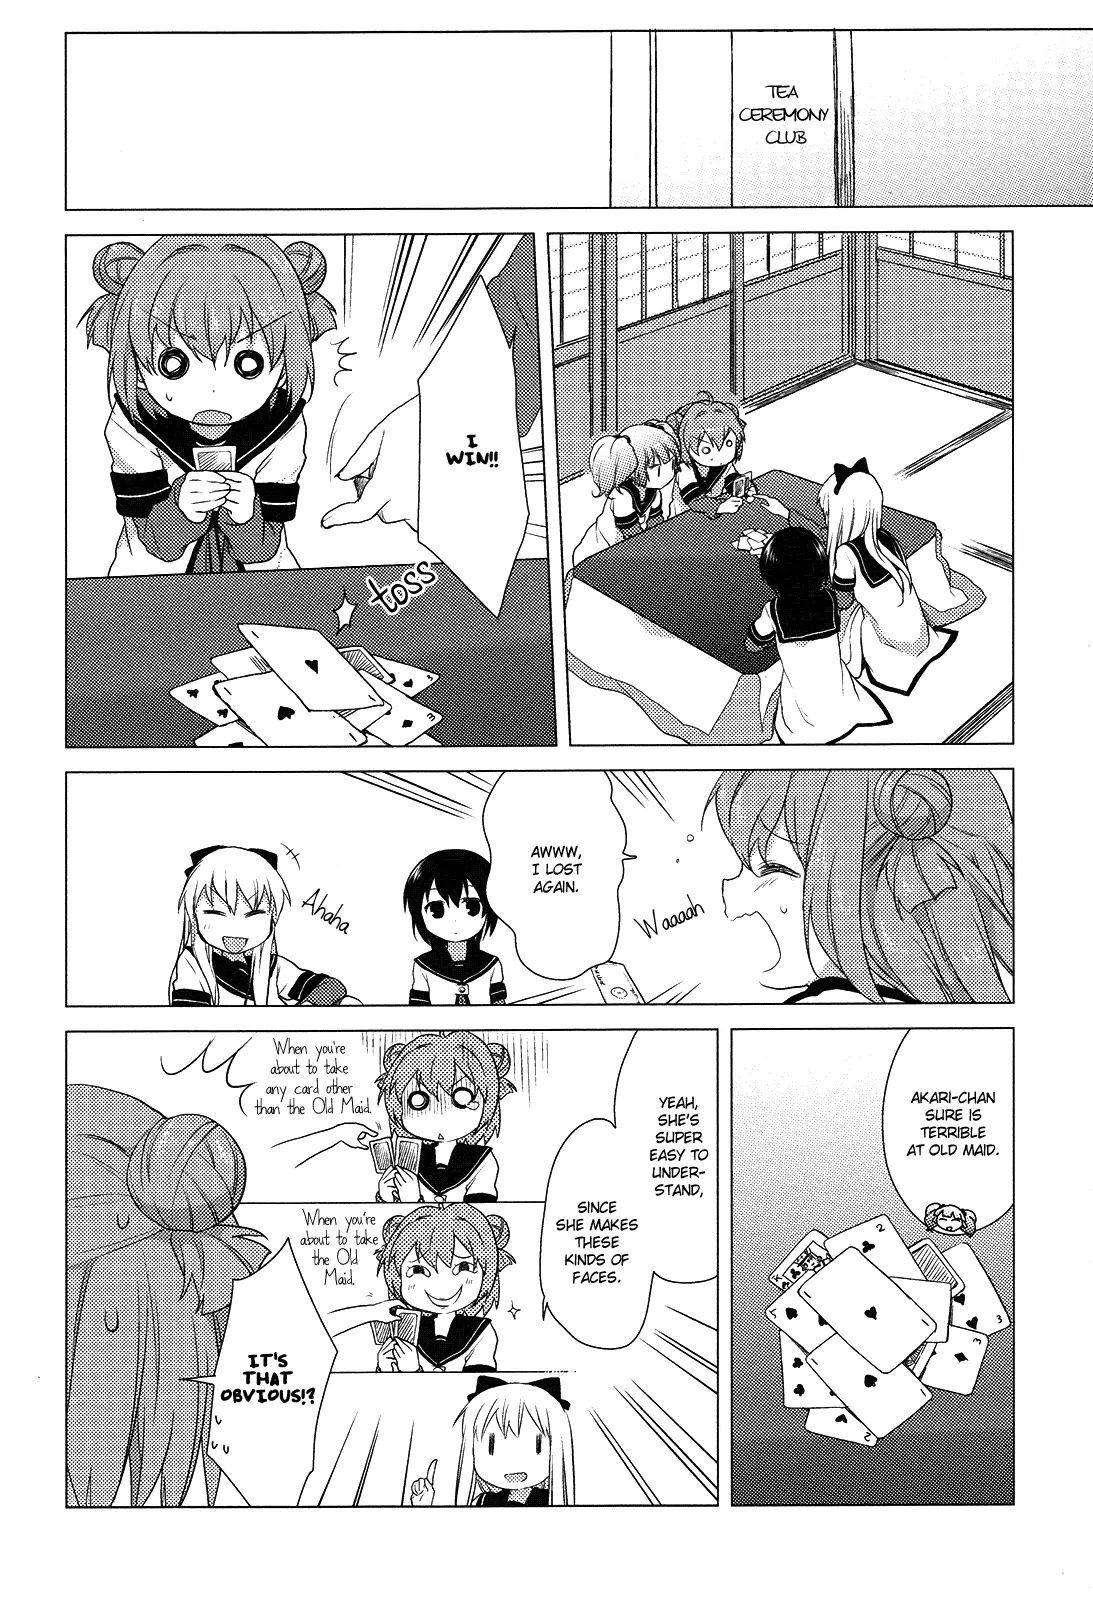 Yuru Yuri Vol.3 Chapter 25: Let's Give Each Other Nicknames - Picture 2